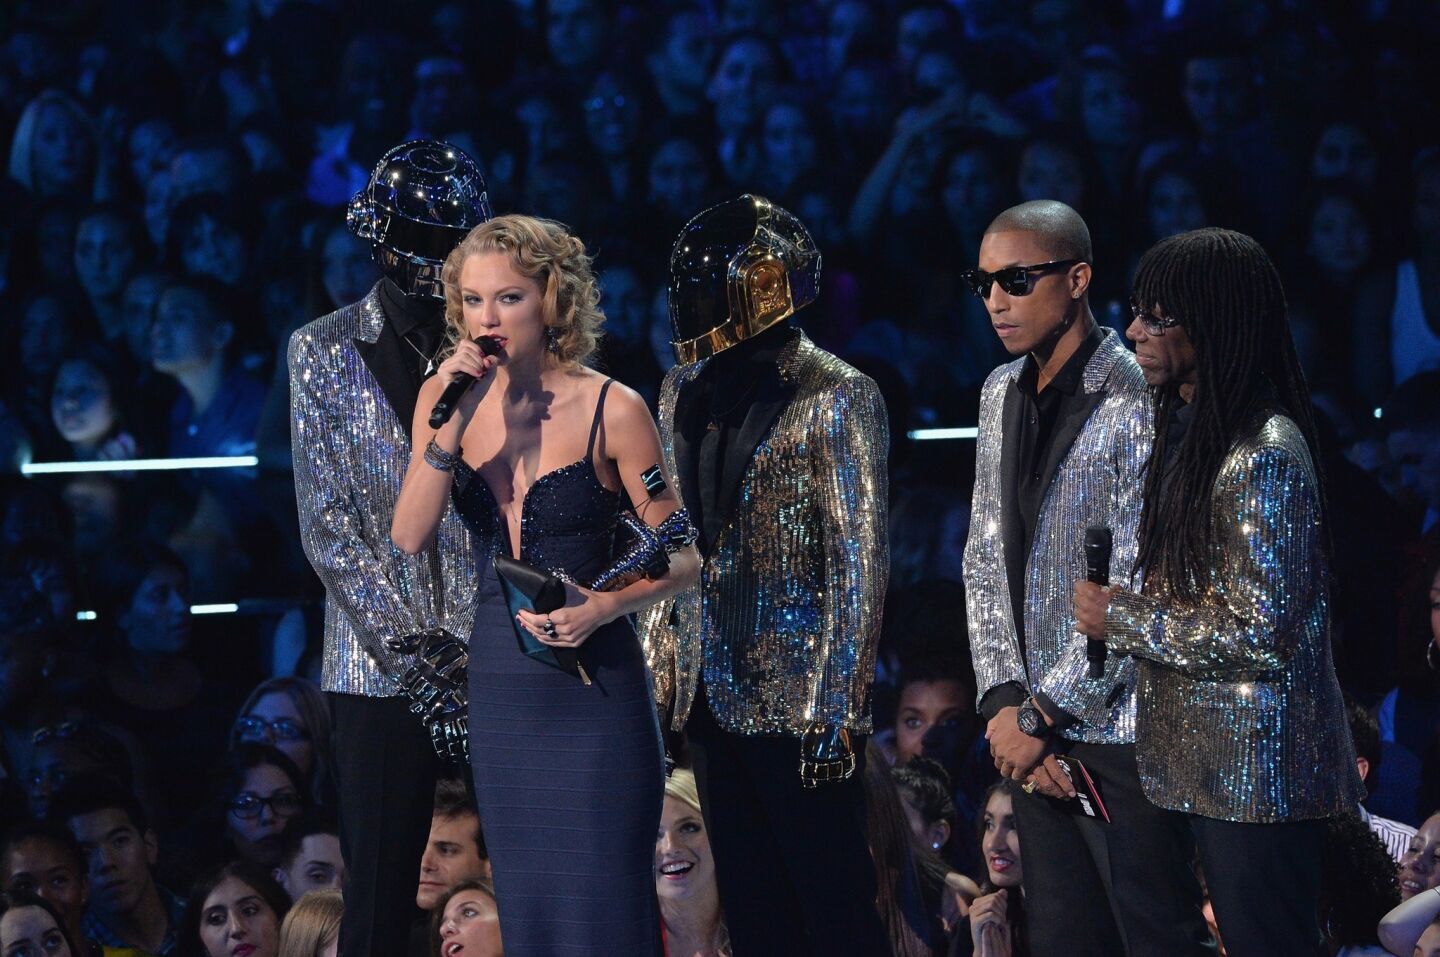 Taylor Swift accepts an award presented to her by Daft Punk, Pharrell Williams and Nile Rodgers.